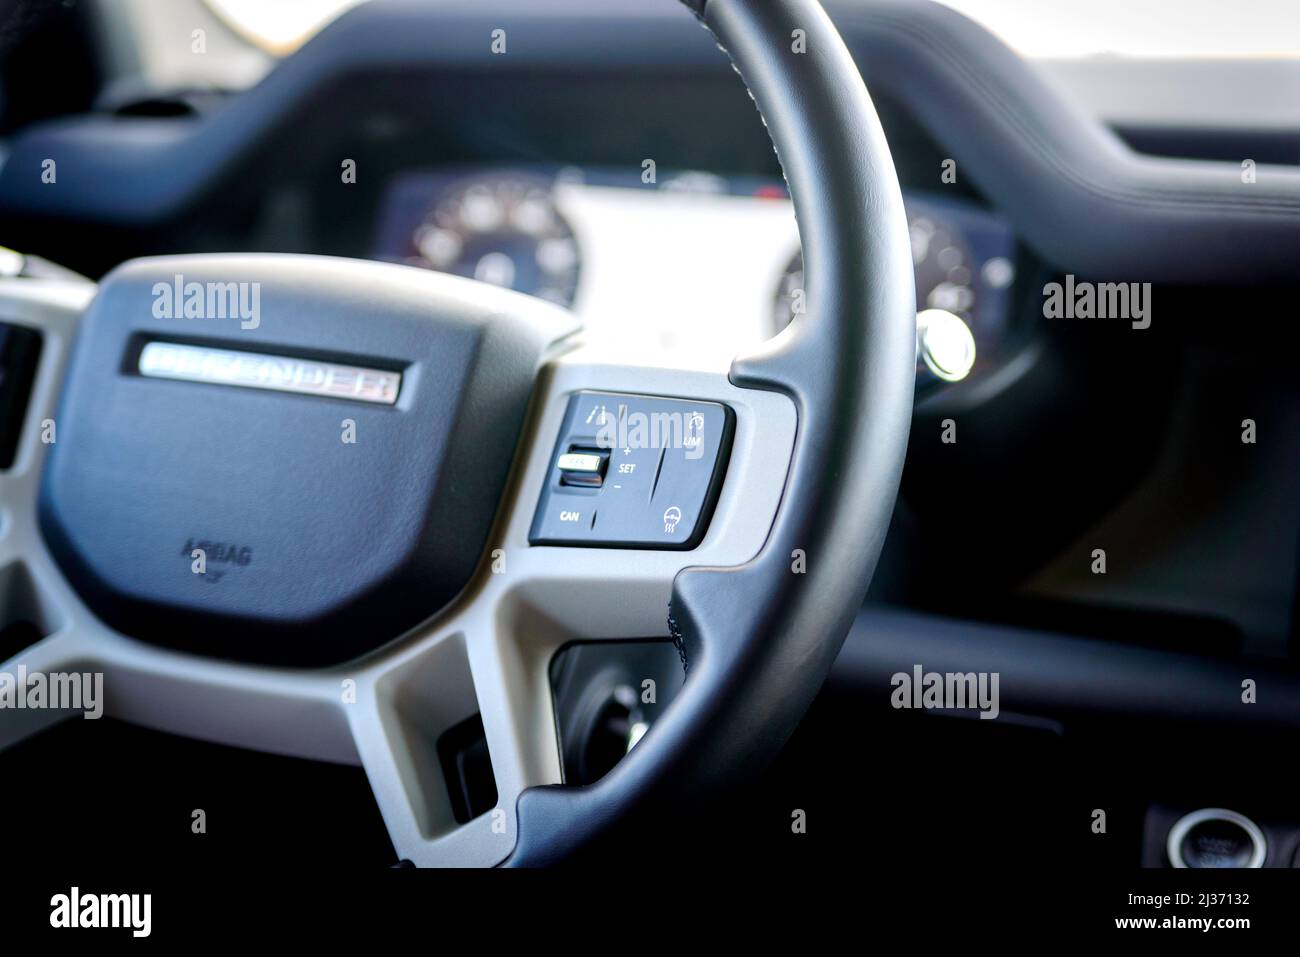 Russia, Rostovskaya oblast, 2021 June 09: Cruise control switches on steering wheel of New Land Rover Defender is a four-wheel drive off-road SUV. Stock Photo